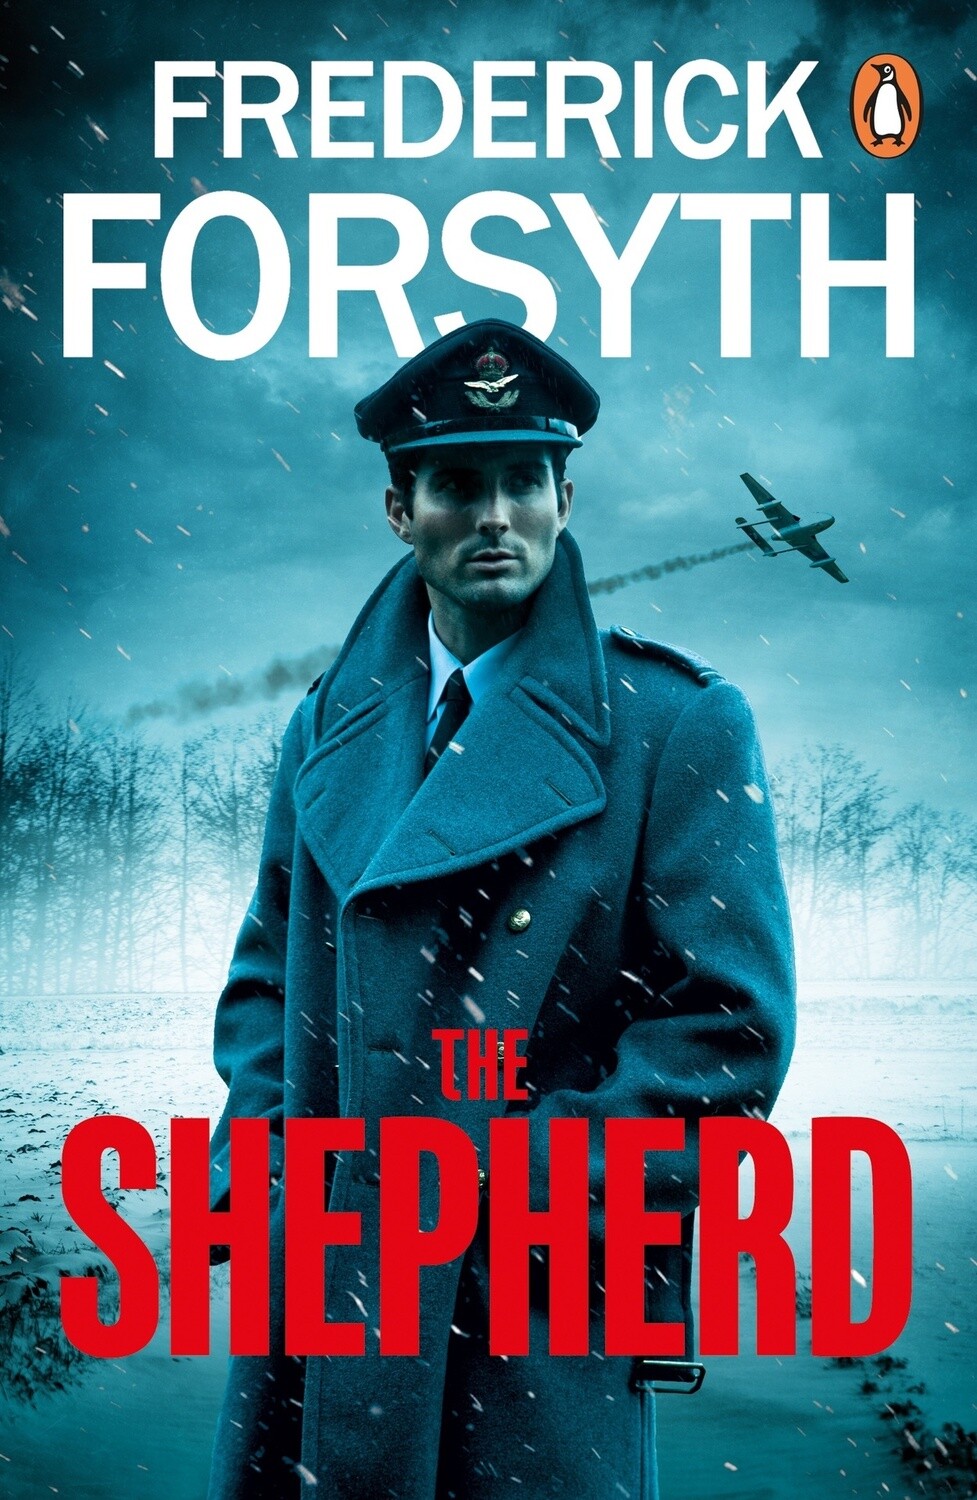 The Shepherd by Frederick Forsyth (TV Tie In)